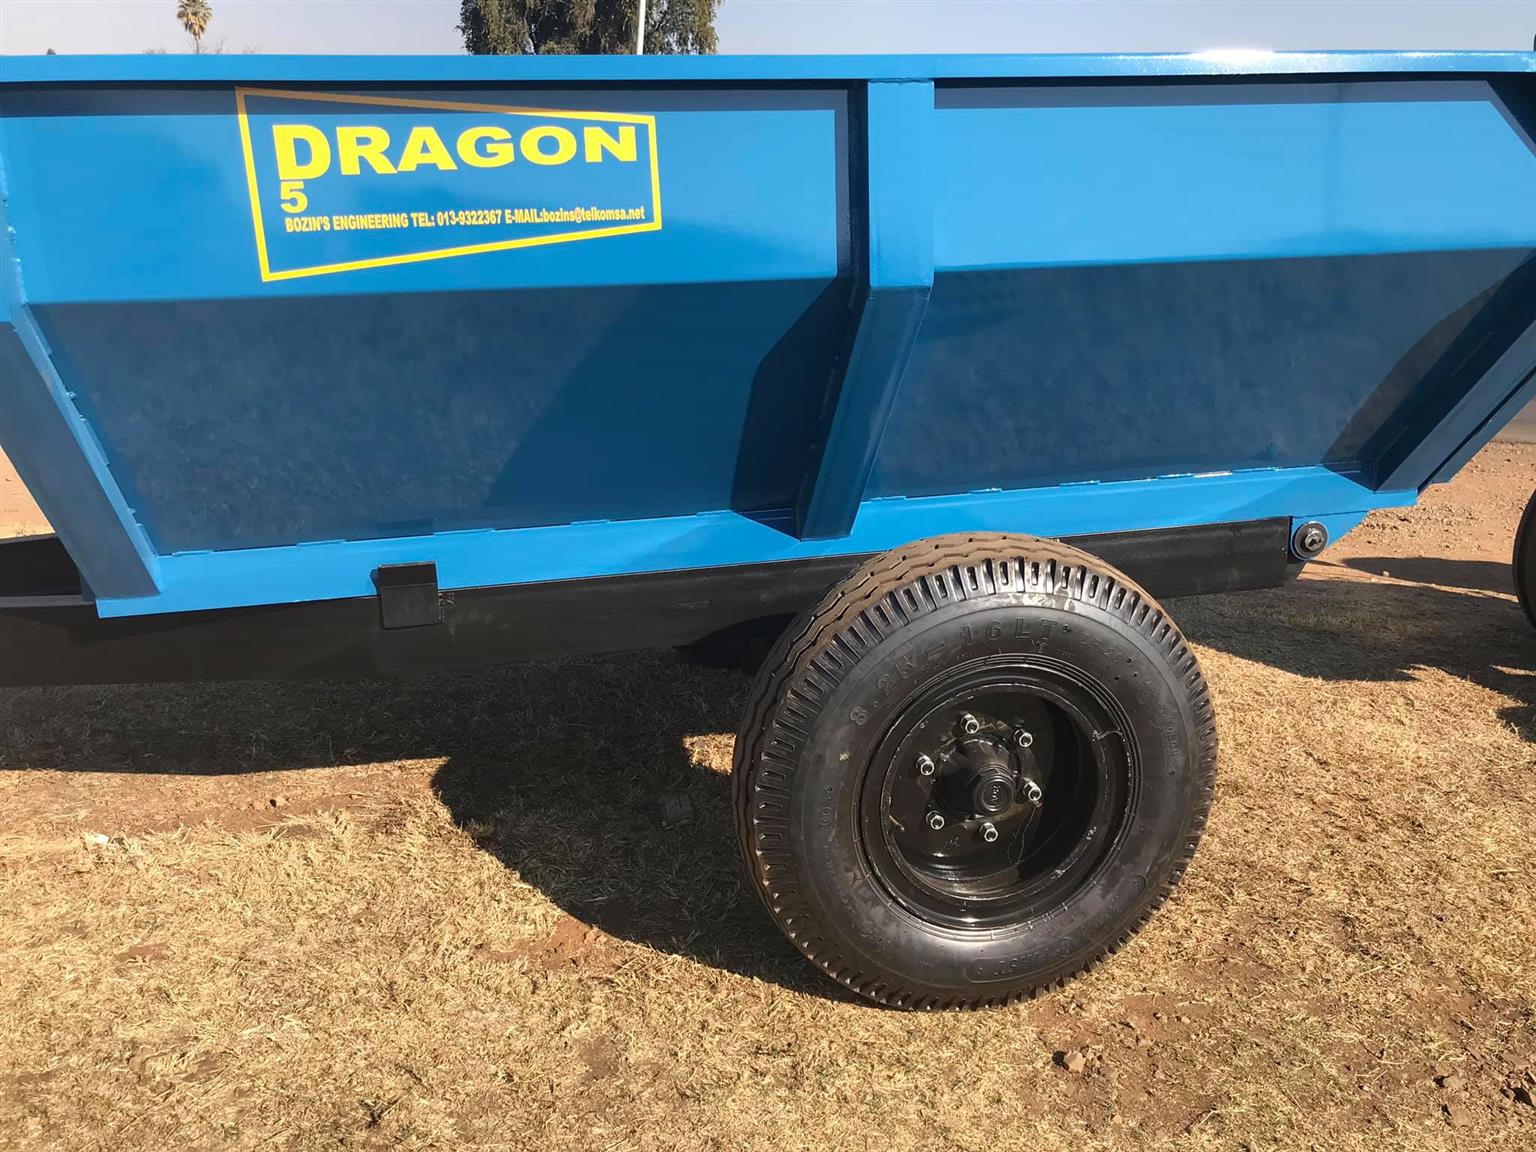 TIP TRAILERS 3 TON UP TO 10 TON